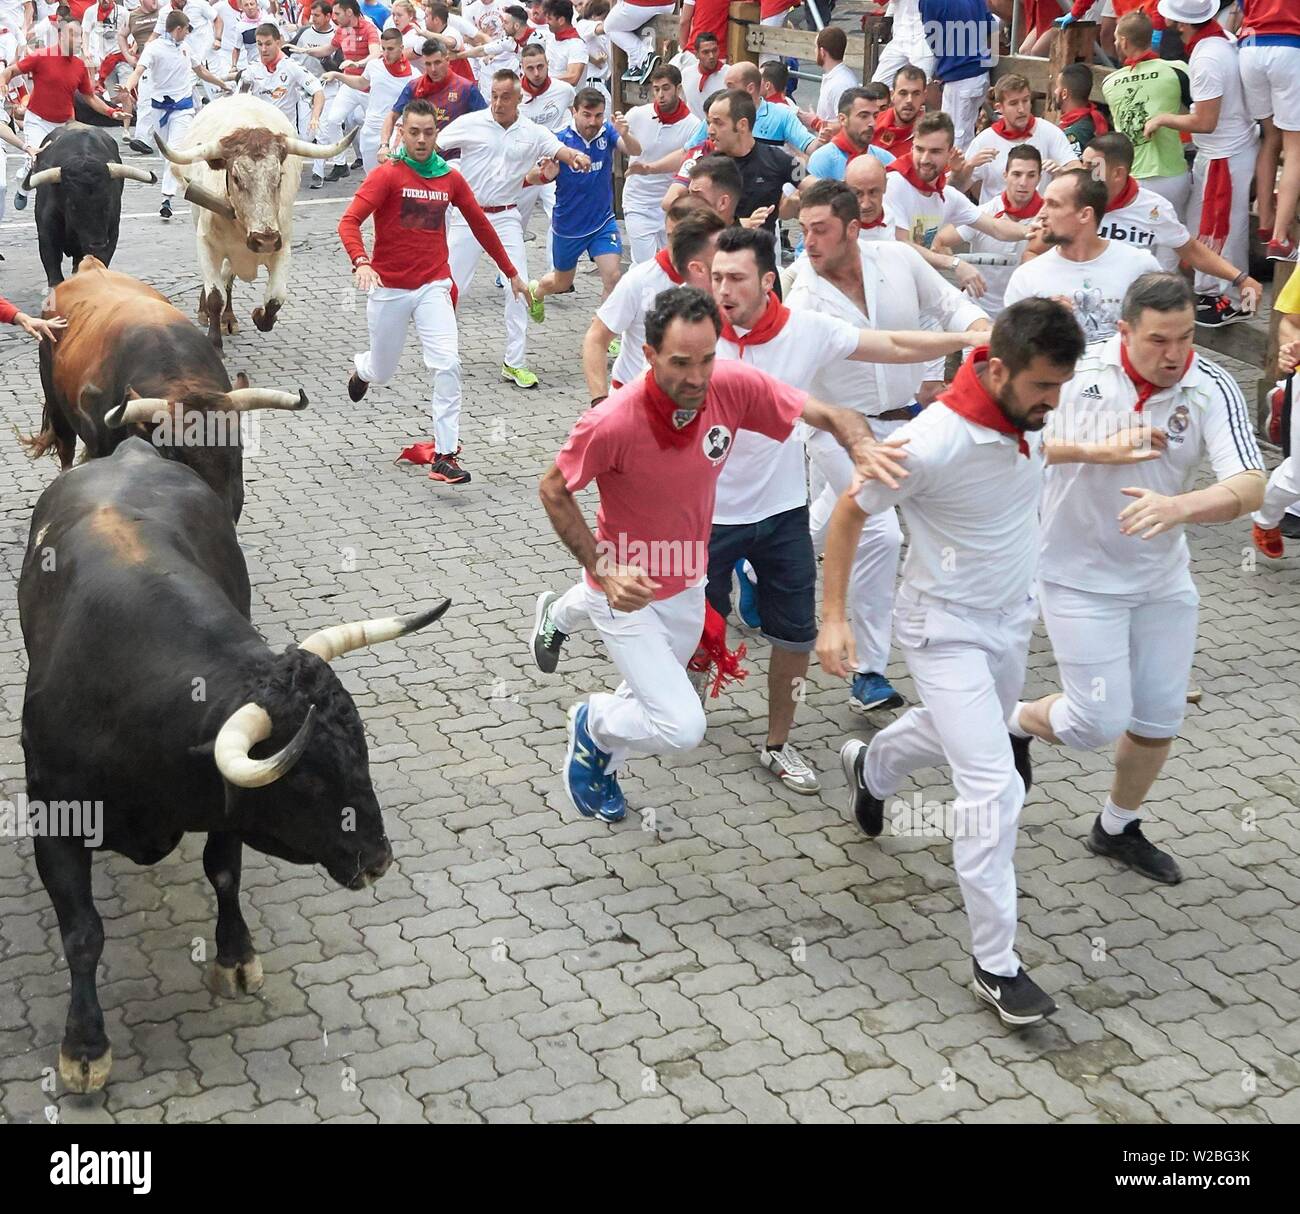 Pamplona, Spain. 08th July, 2019. Participants run ahead of Puerto de  Cebada Gago's fighting bulls on the second day of the San Fermin bull run  festival in Pamplona, Spain on July 8,